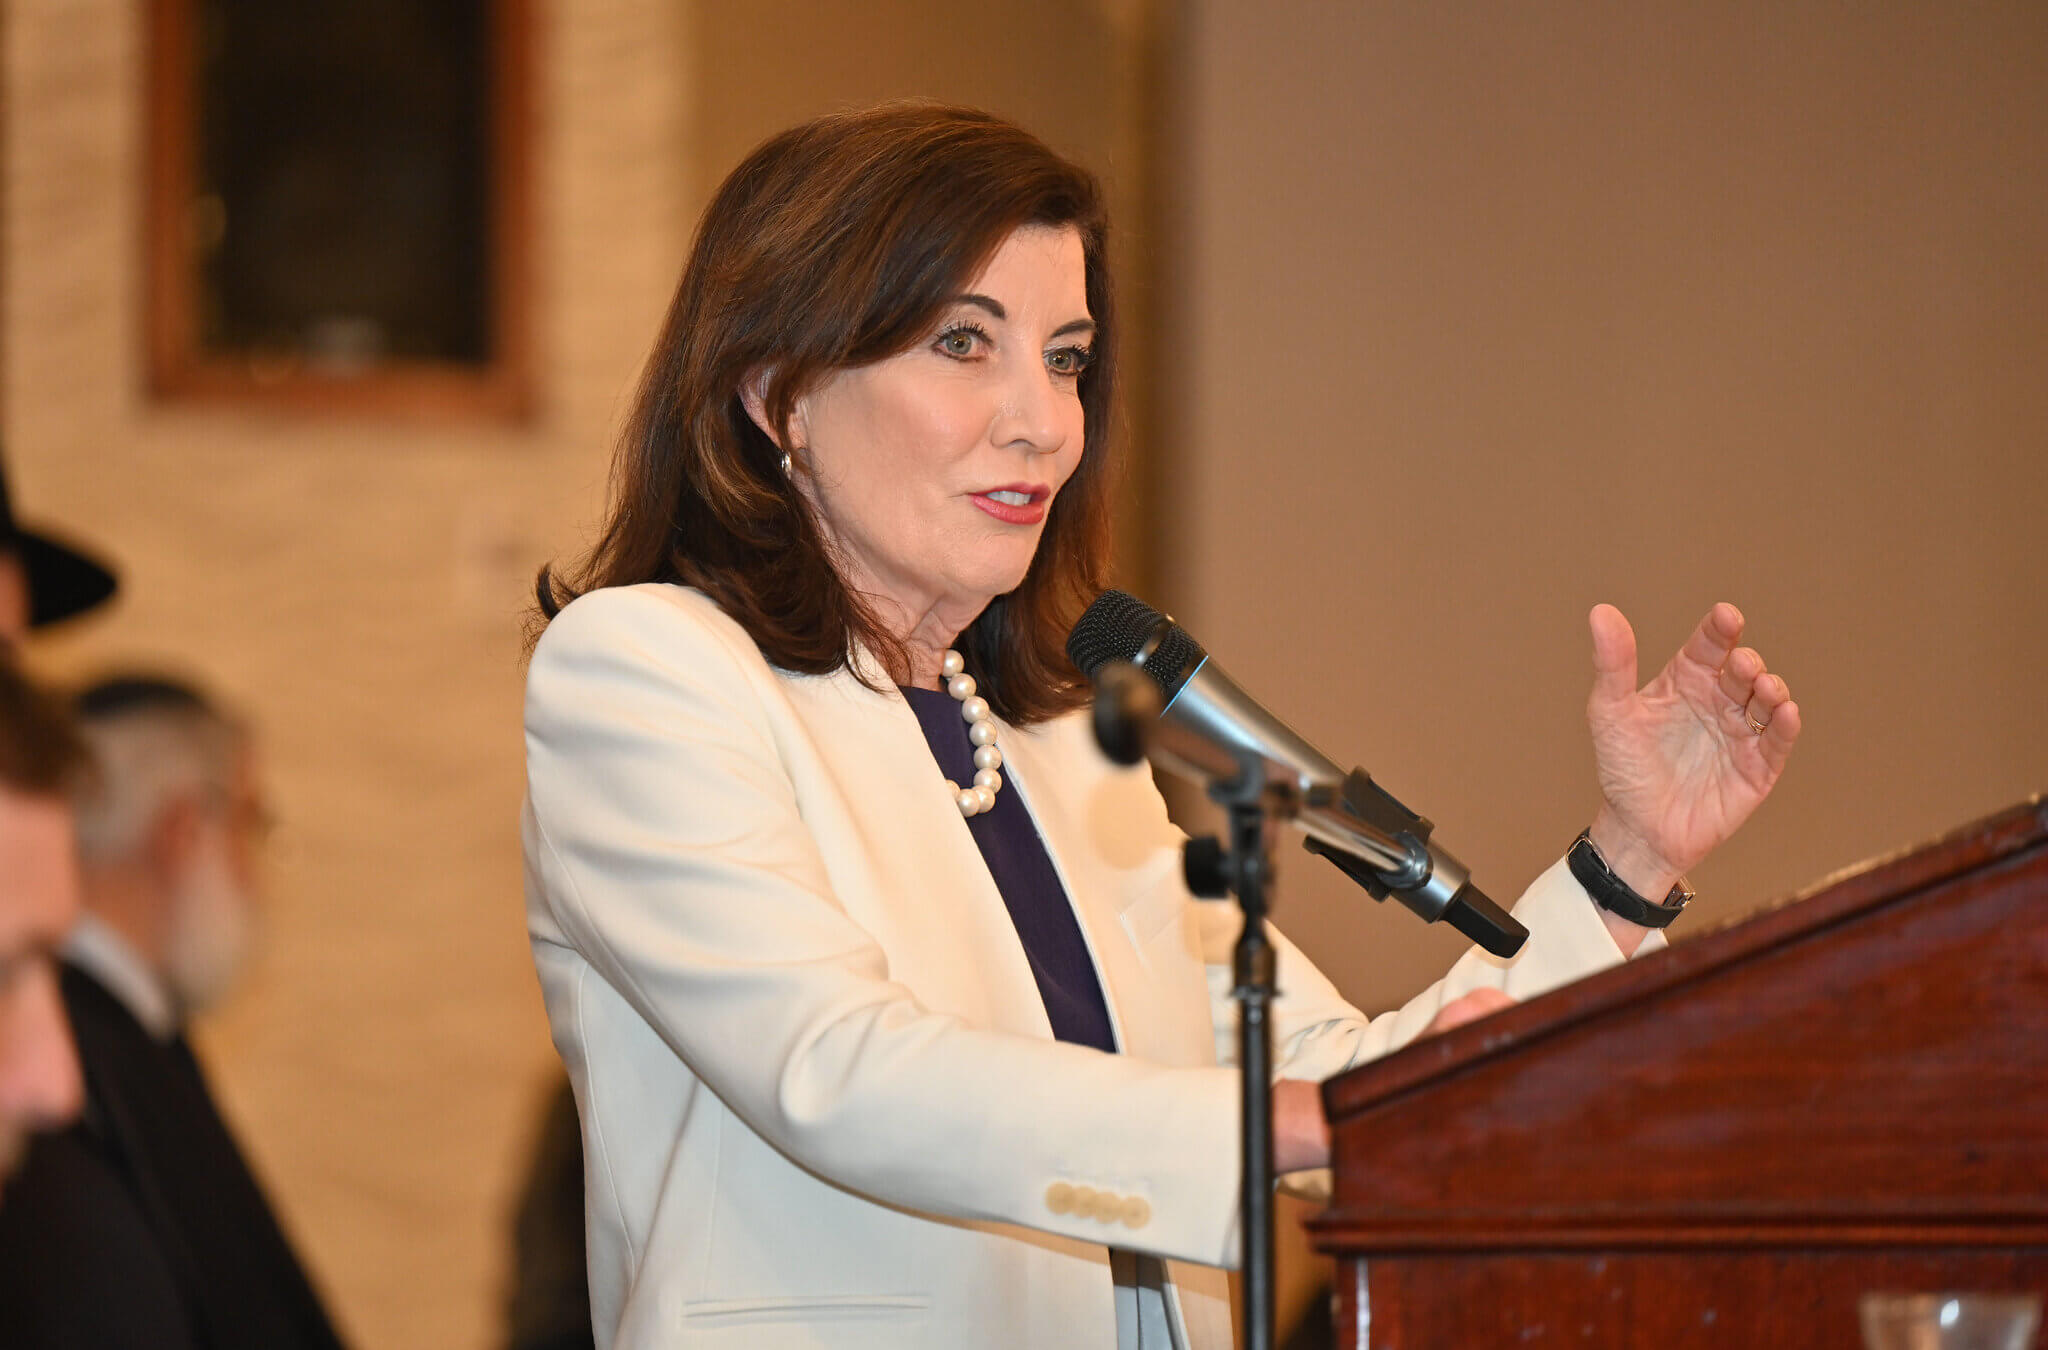 Gov. Kathy Hochul delivers remarks at the Crown Heights Jewish Community Council Women’s Brunch on May 29, 2022.